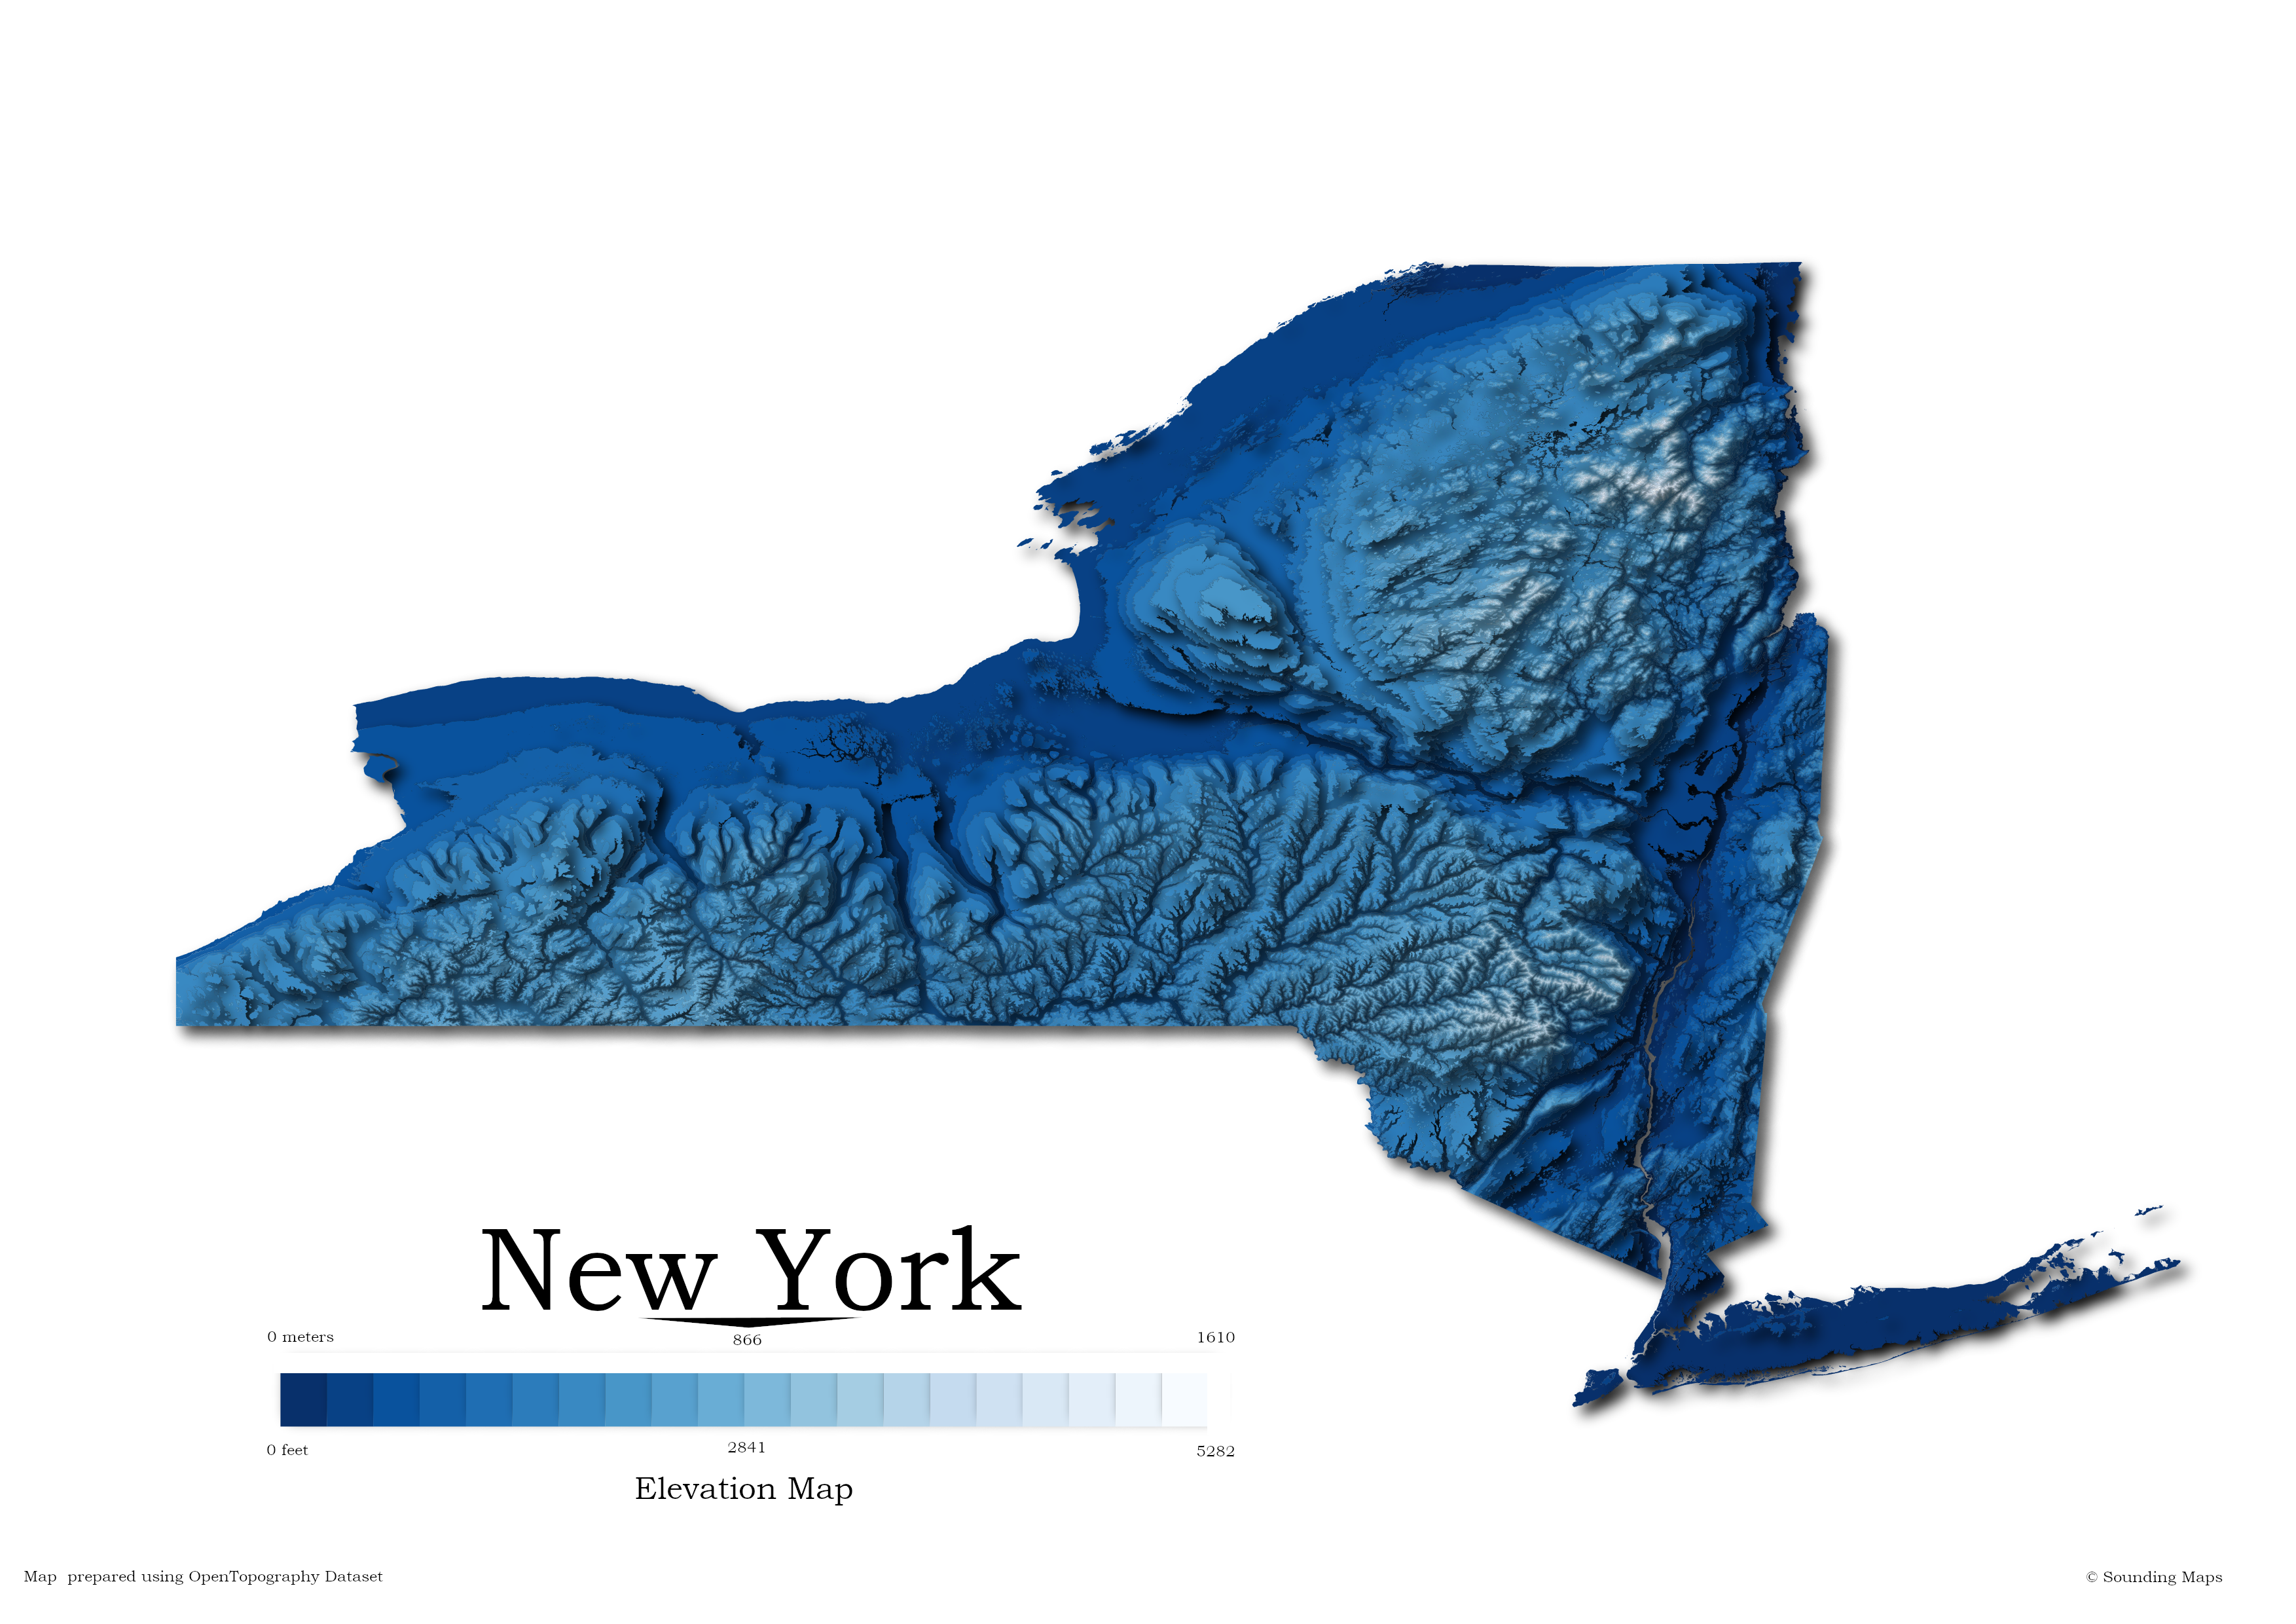 Elevation Map of New York State (NY)